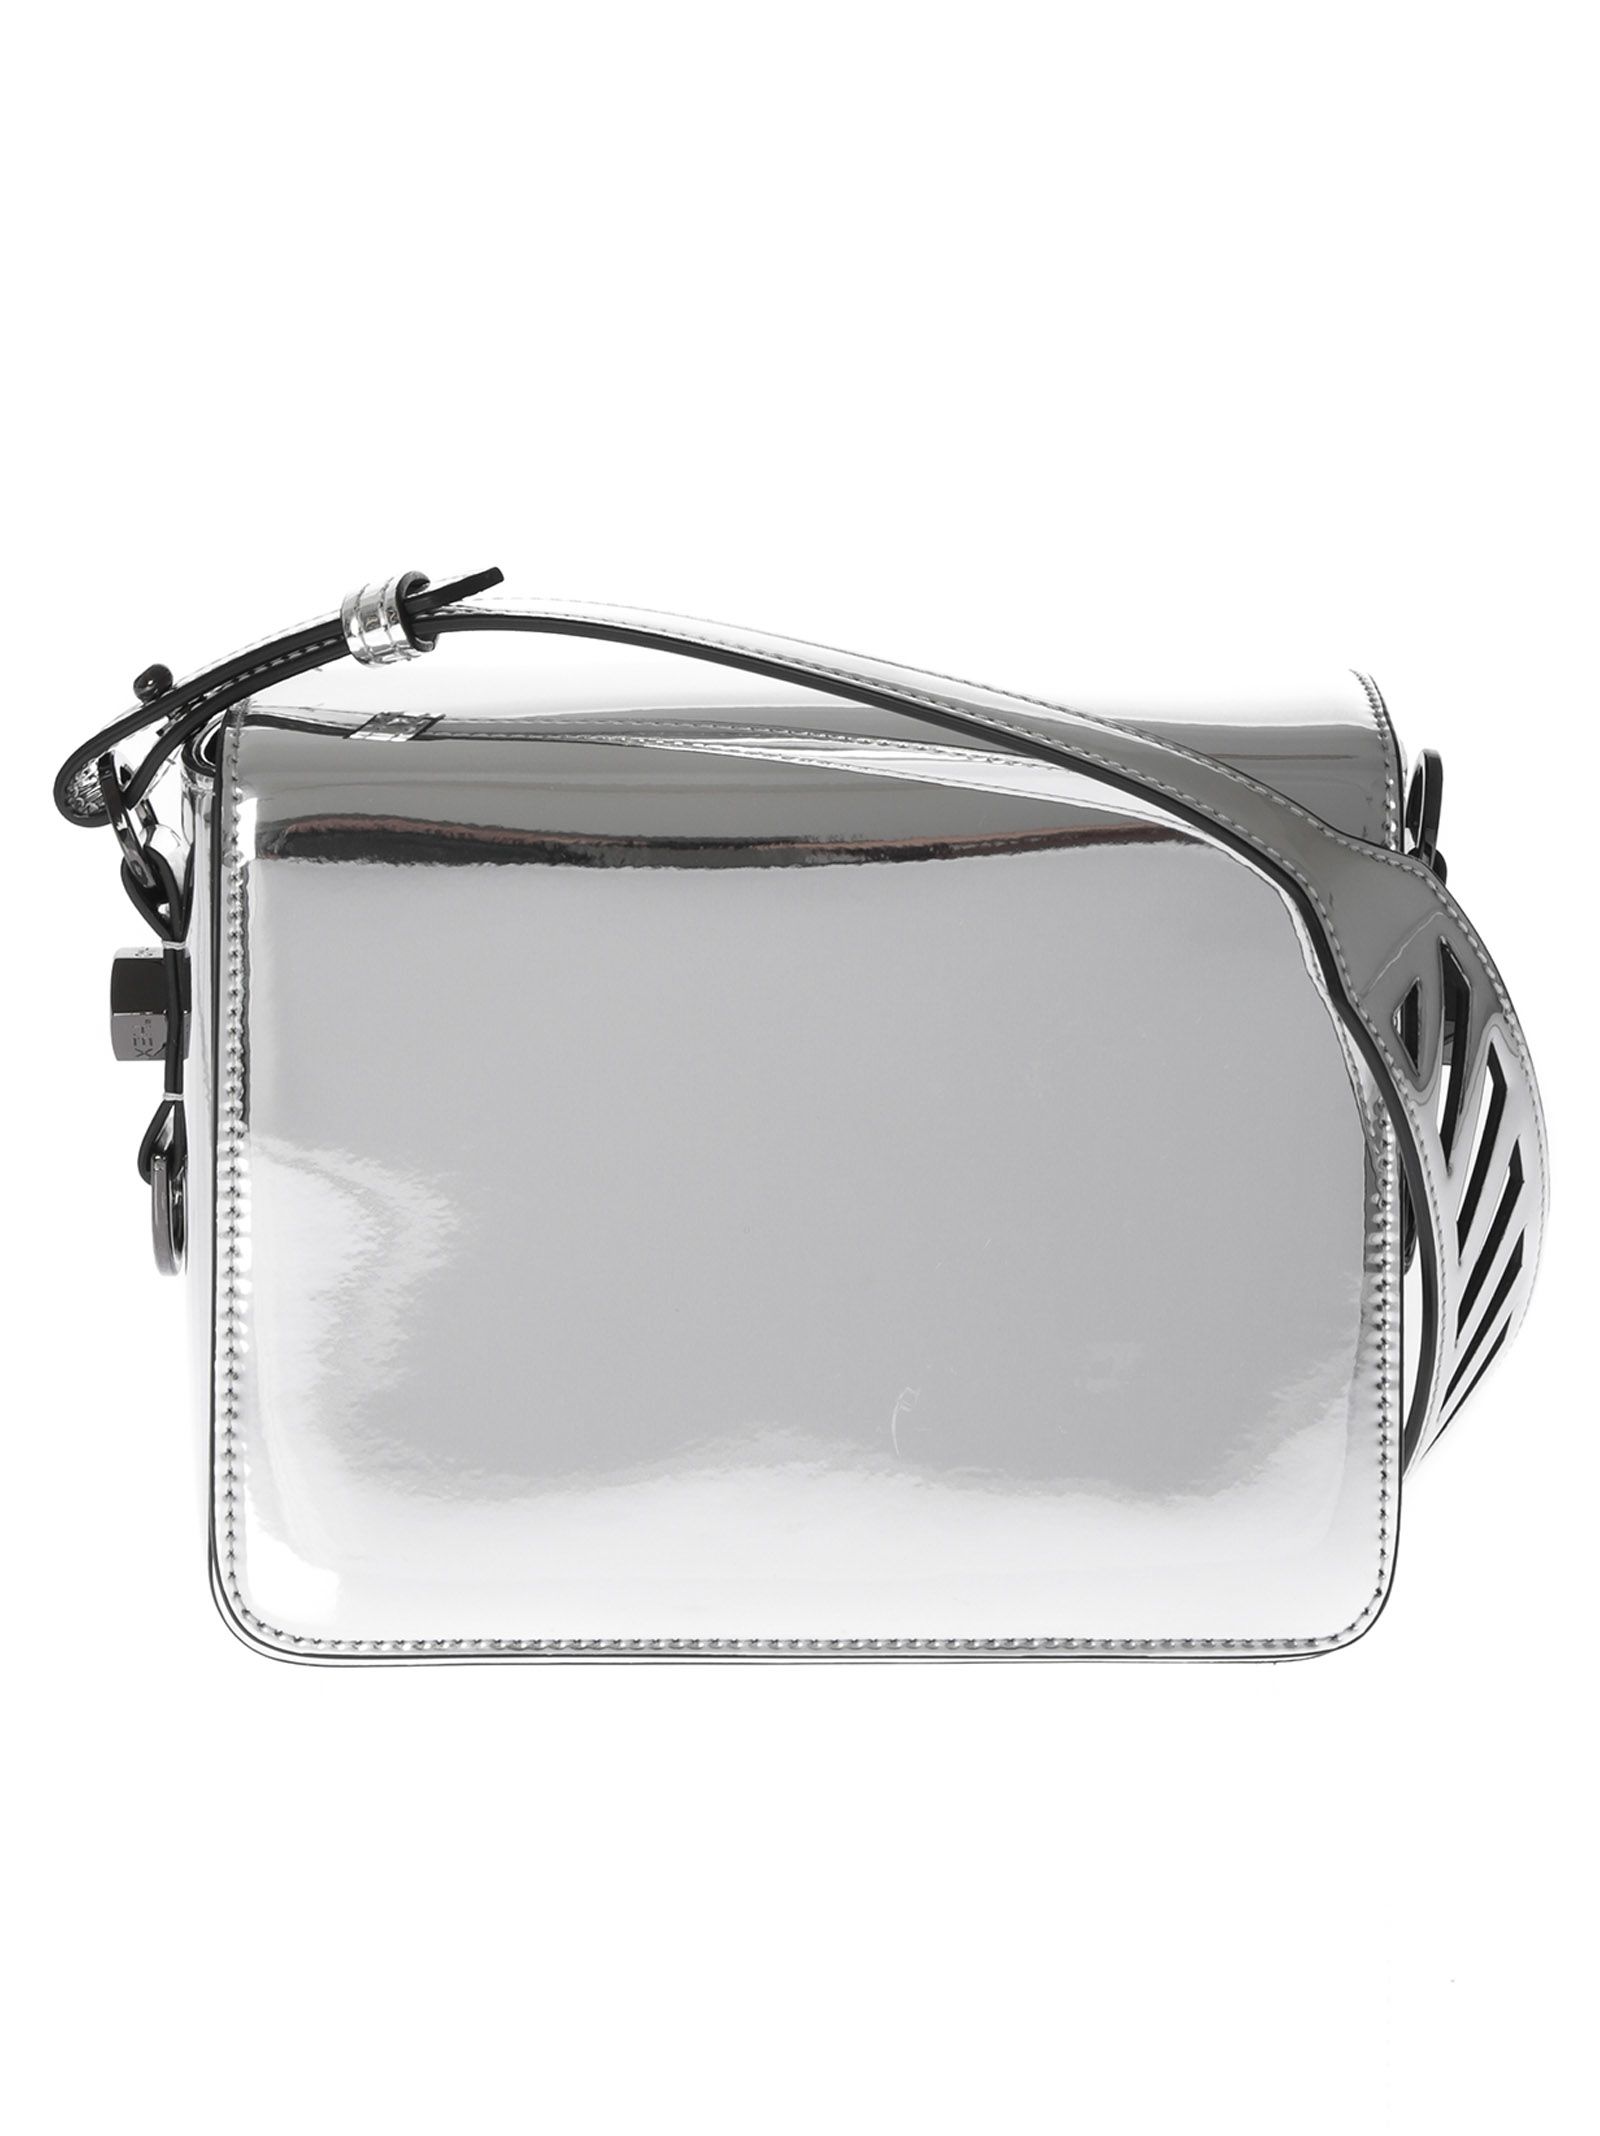 italist | Best price in the market for Off-White Off-white Mirror Shoulder Bag - 10722396 | italist